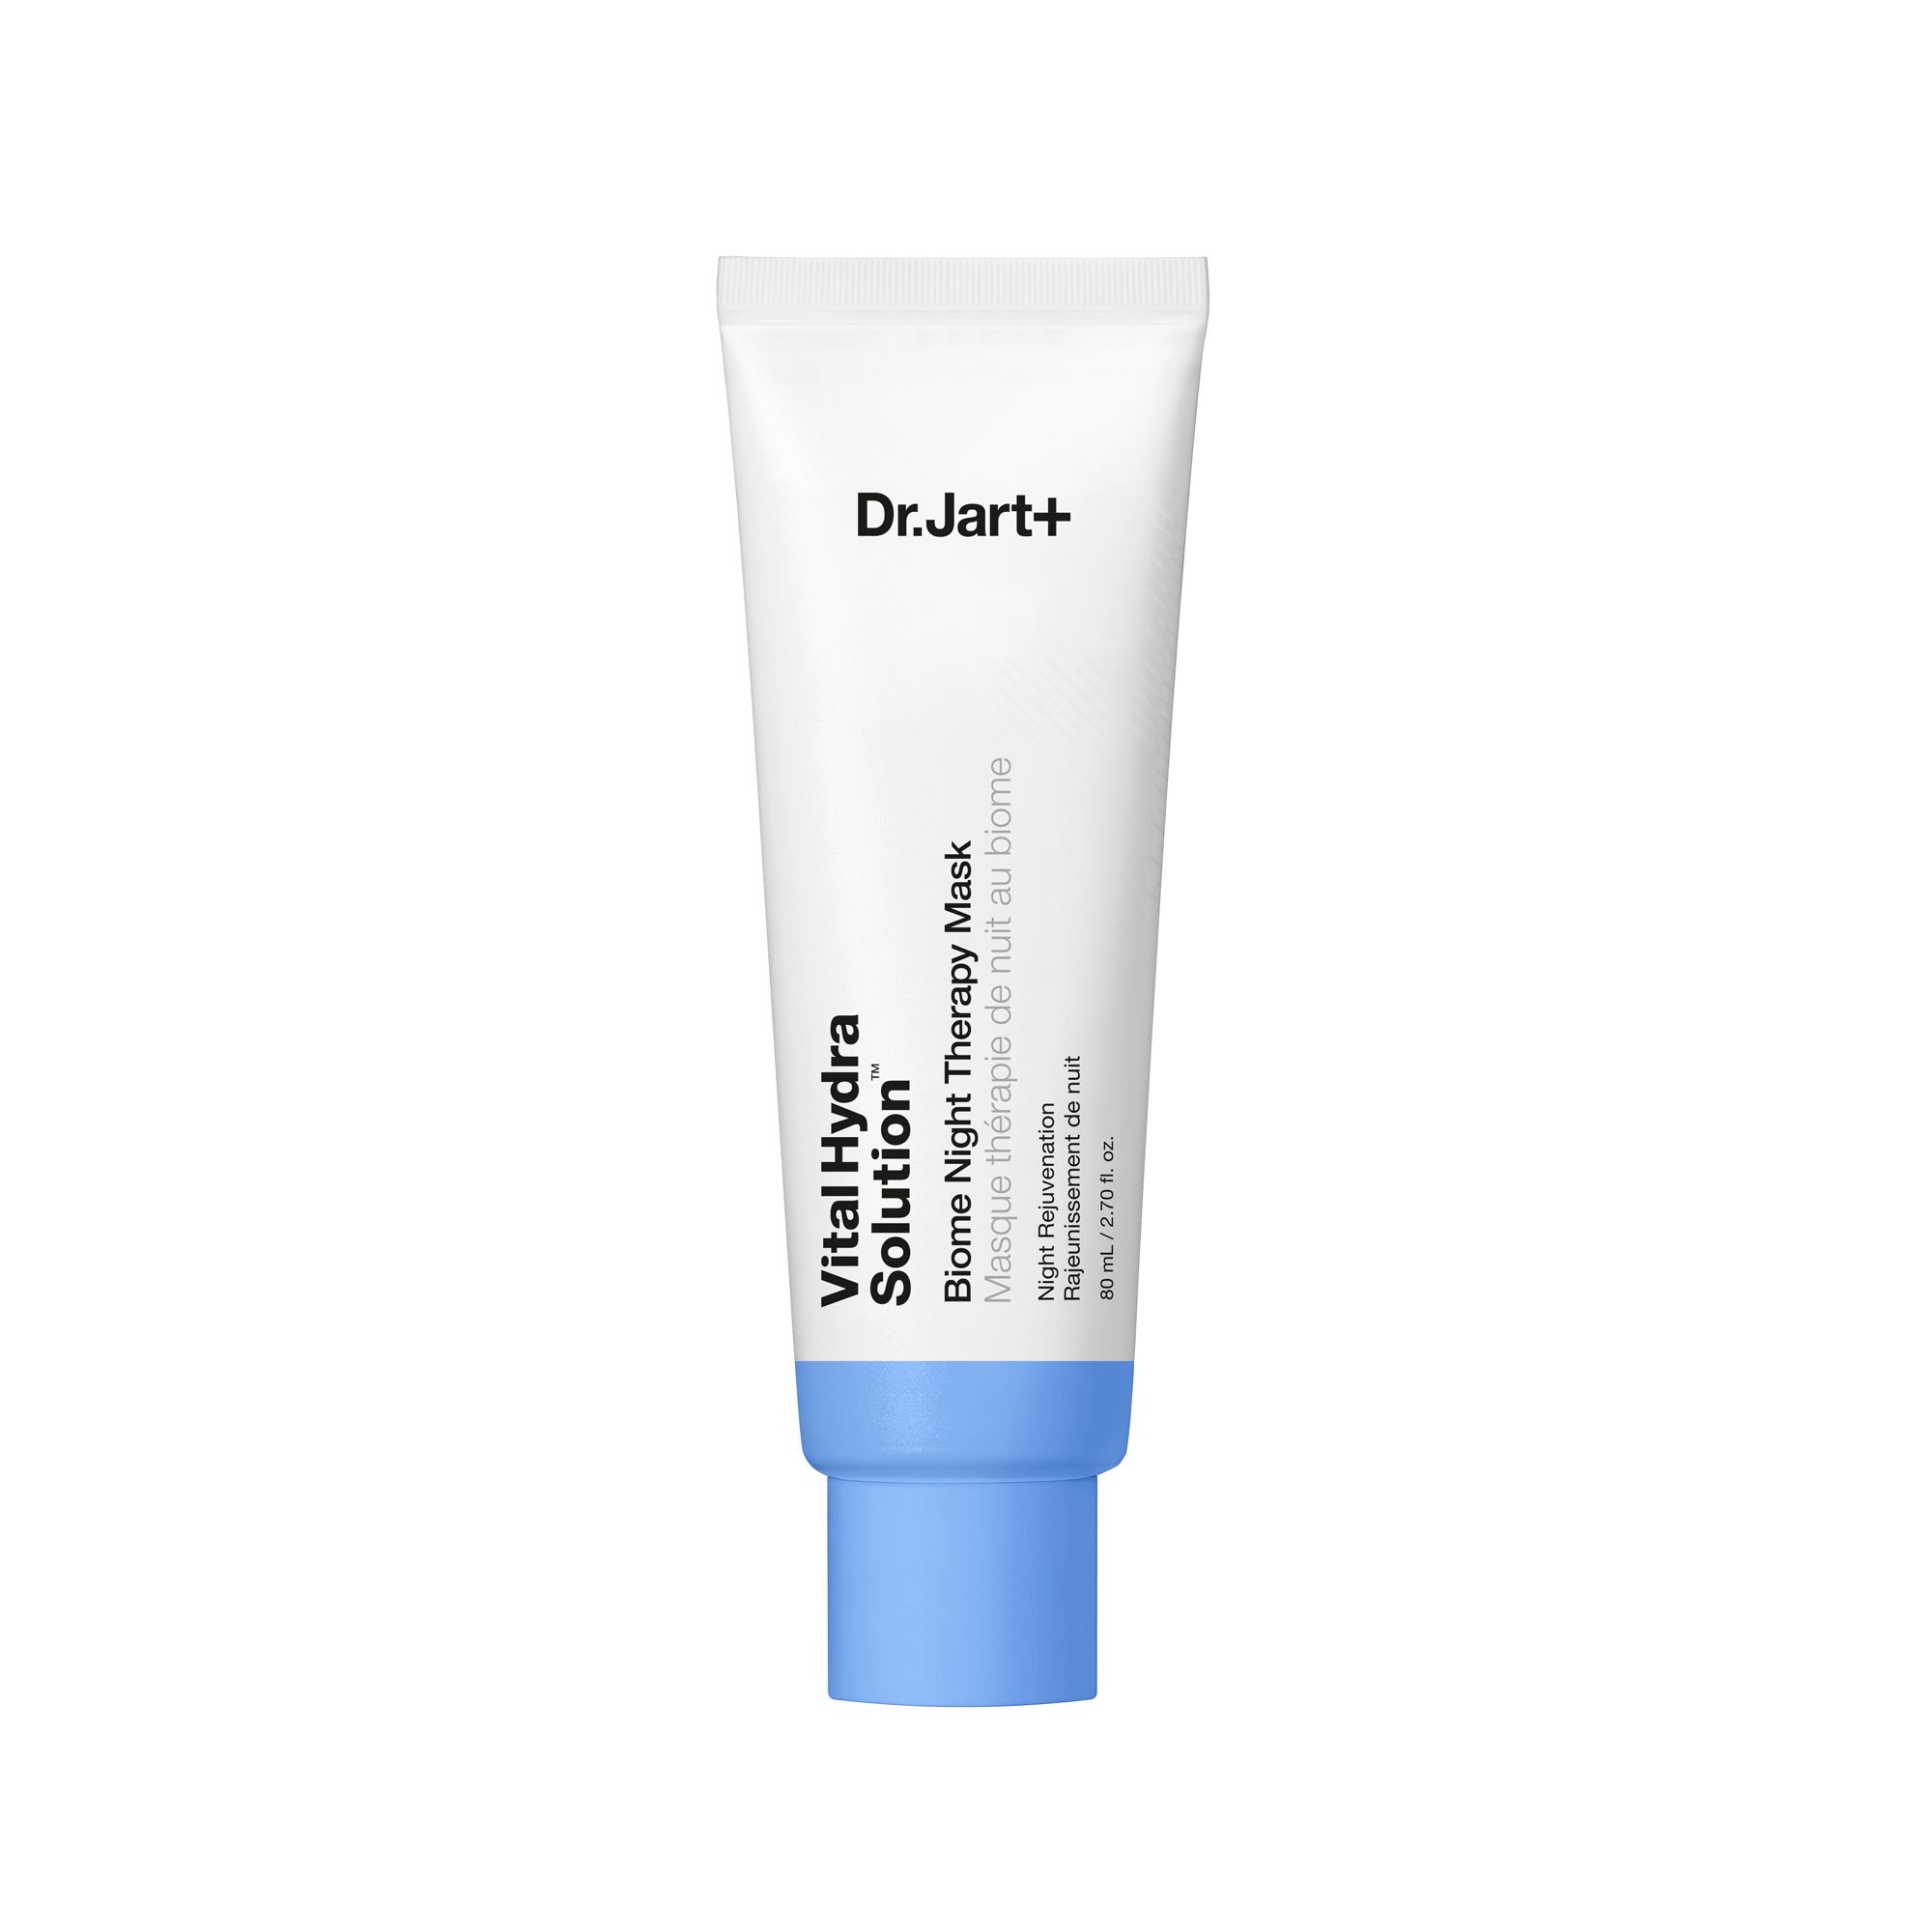 Dr.Jart+ Vital Hydra Solution Biome Night Therapy Mask